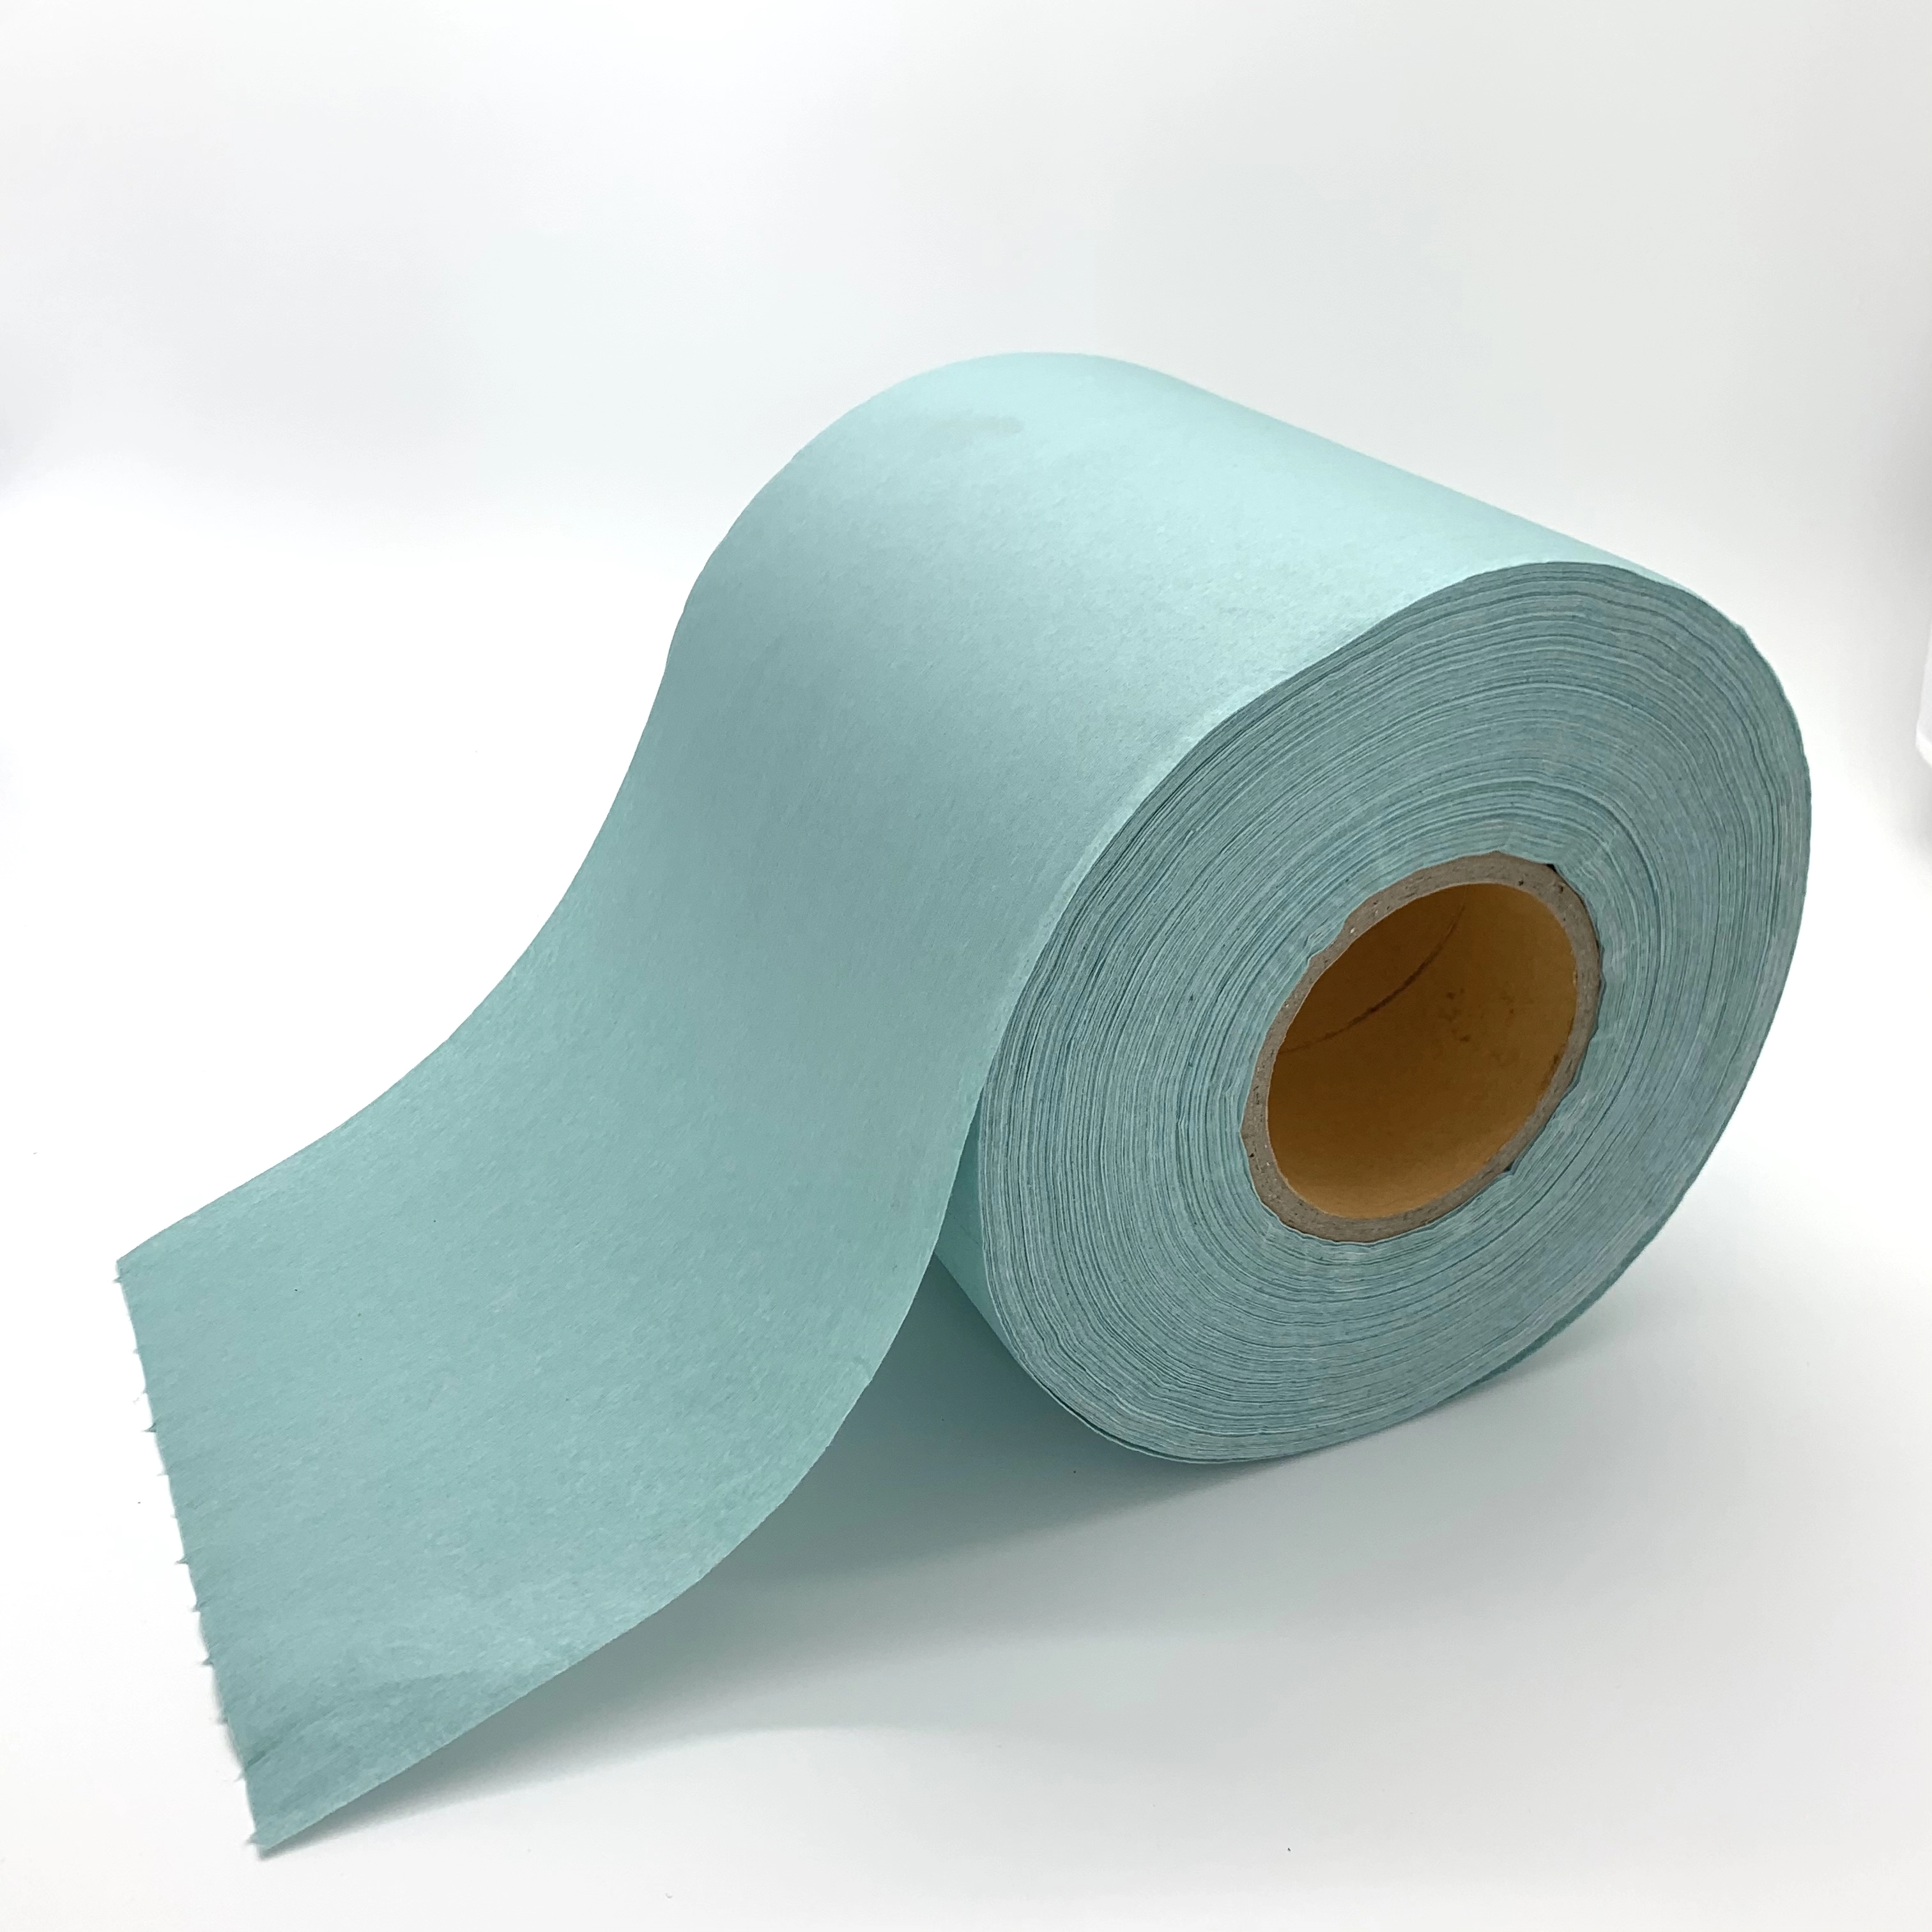 JD-6550 Big Roll Clean Room Wiper Roll Industrial Paper Roll Manufacturer Direct Sale For Multiple Ways Of Using